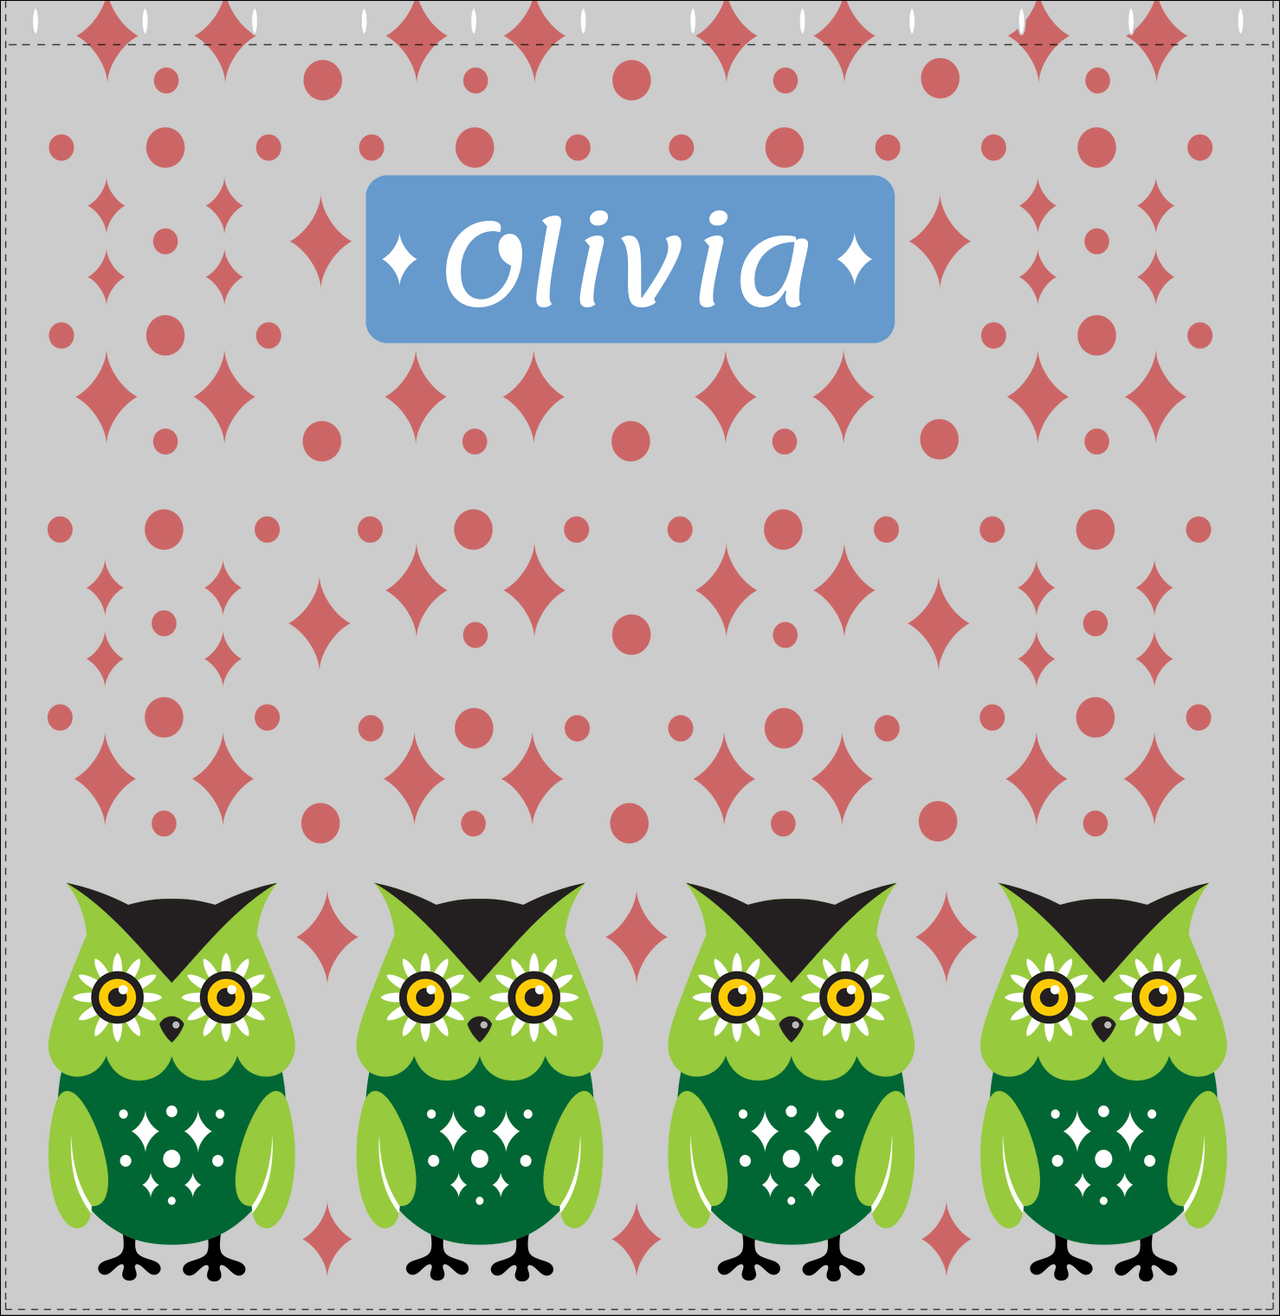 Personalized Owl Shower Curtain II - Owl 08 - Grey Background - Decorate View